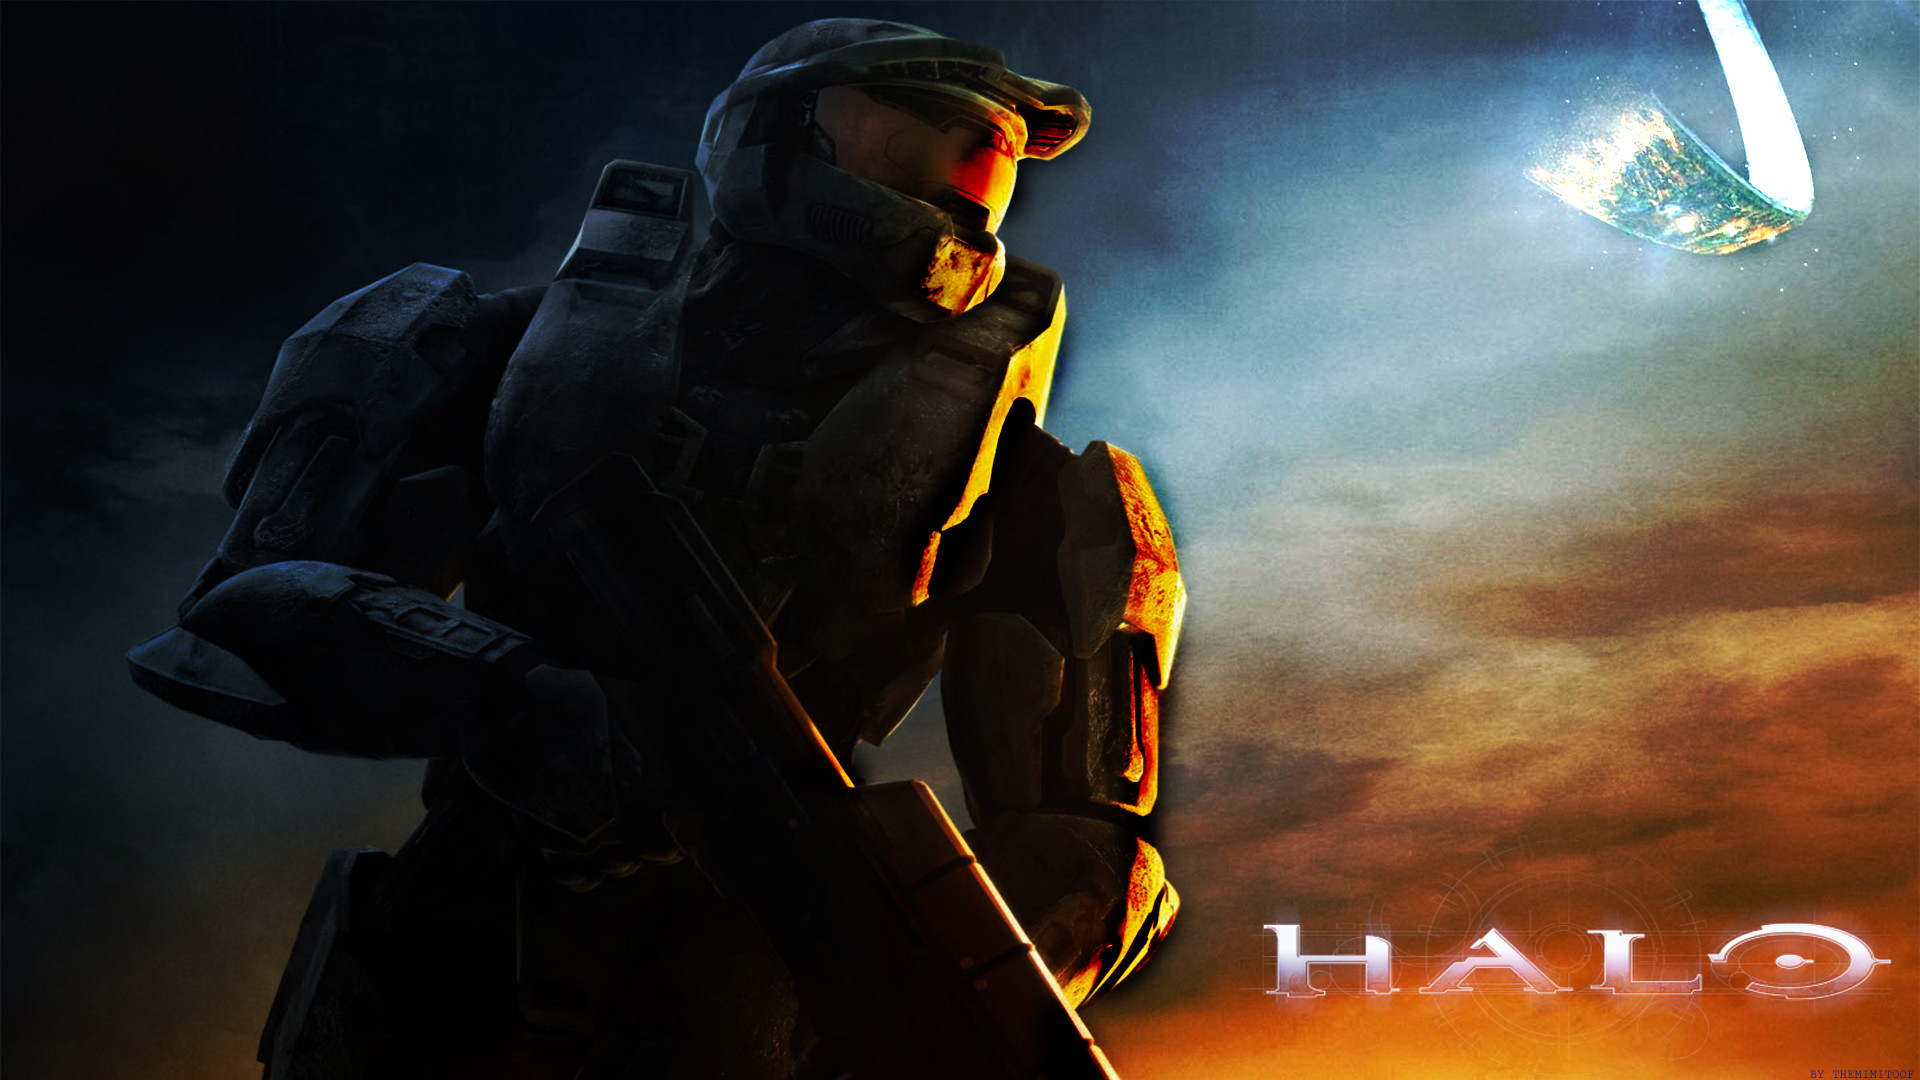 1920x1080 Halo-Wallpaper-4-by-mountwall-1